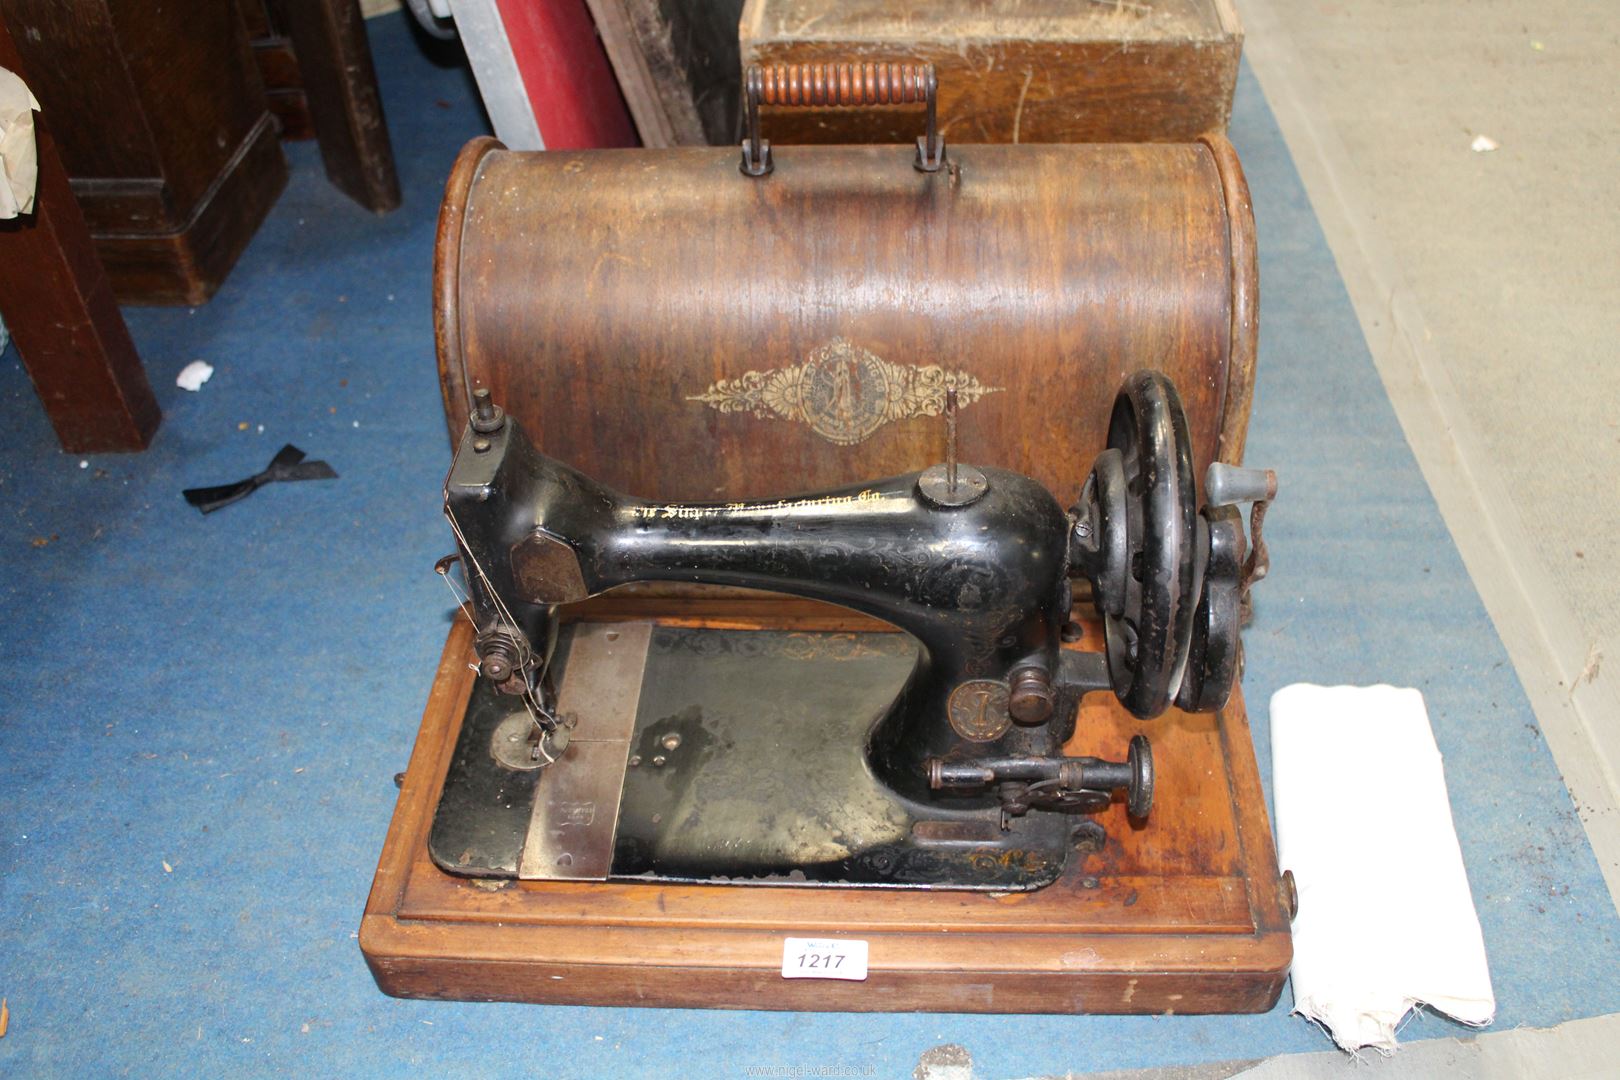 A hand Singer sewing machine in bentwood case.